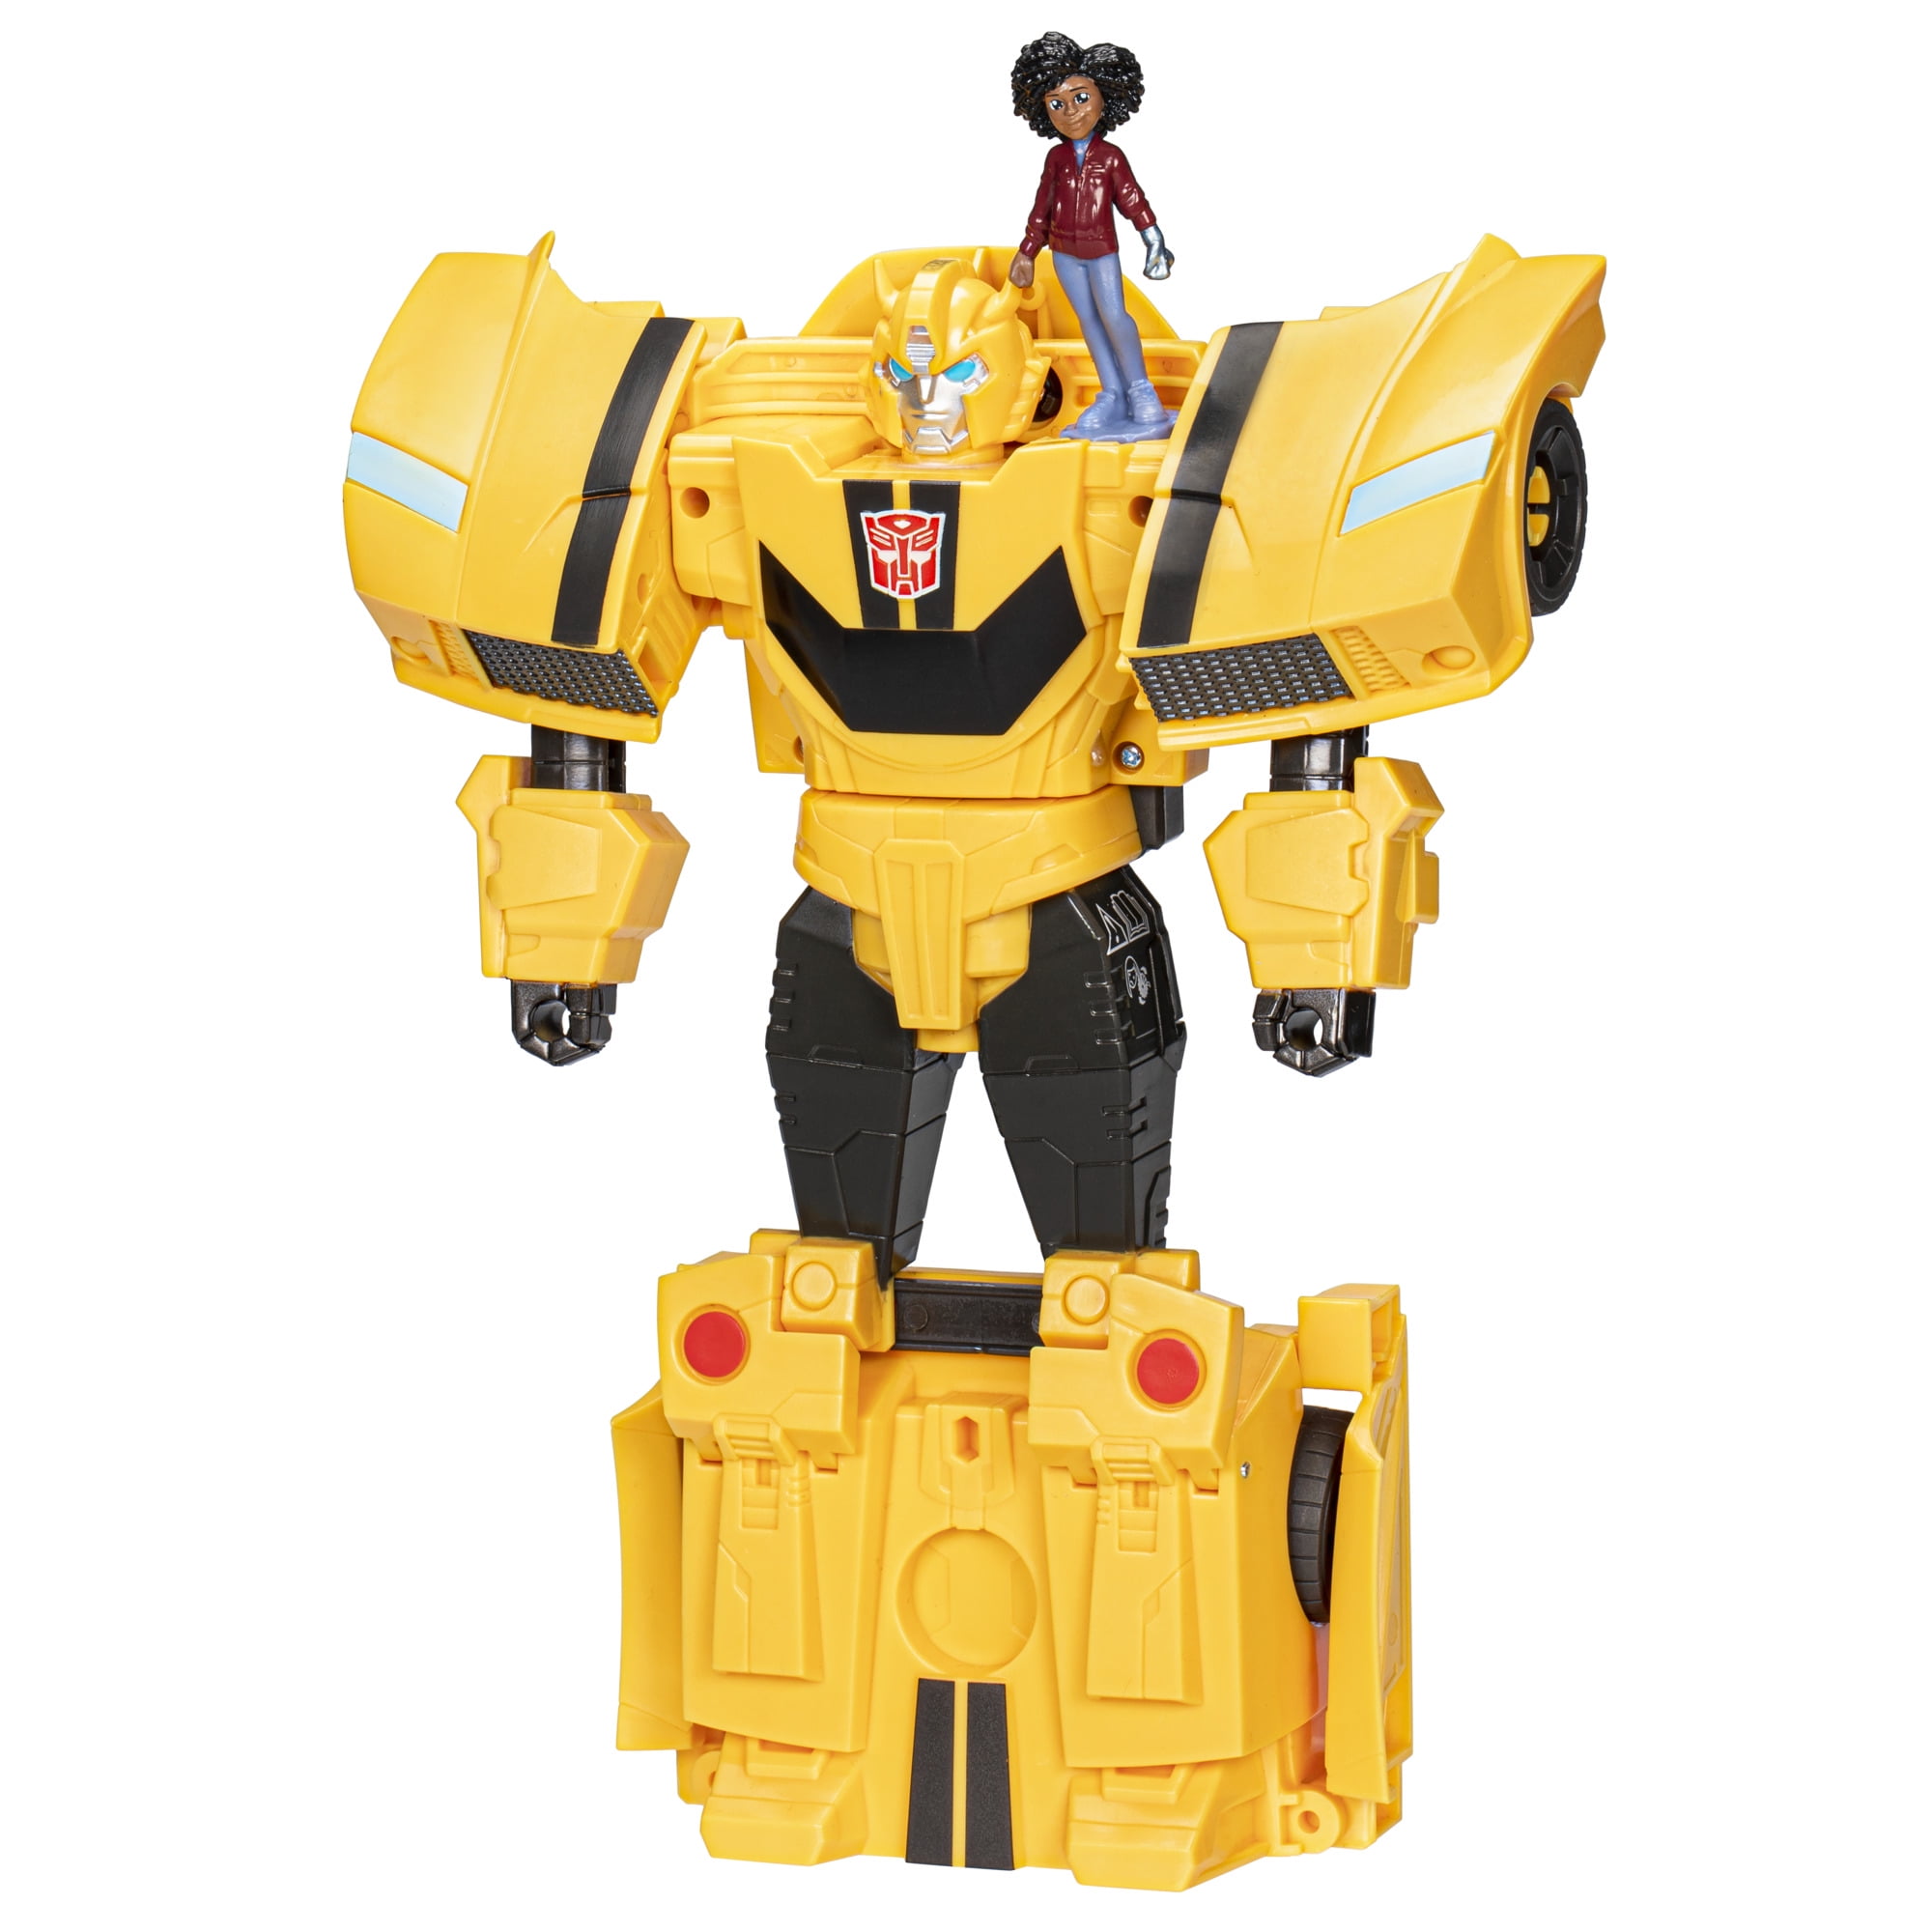 Transformers Toys Earthspark Spin Changer Bumblebee Action Figure with Mo, Great Easter Gifts